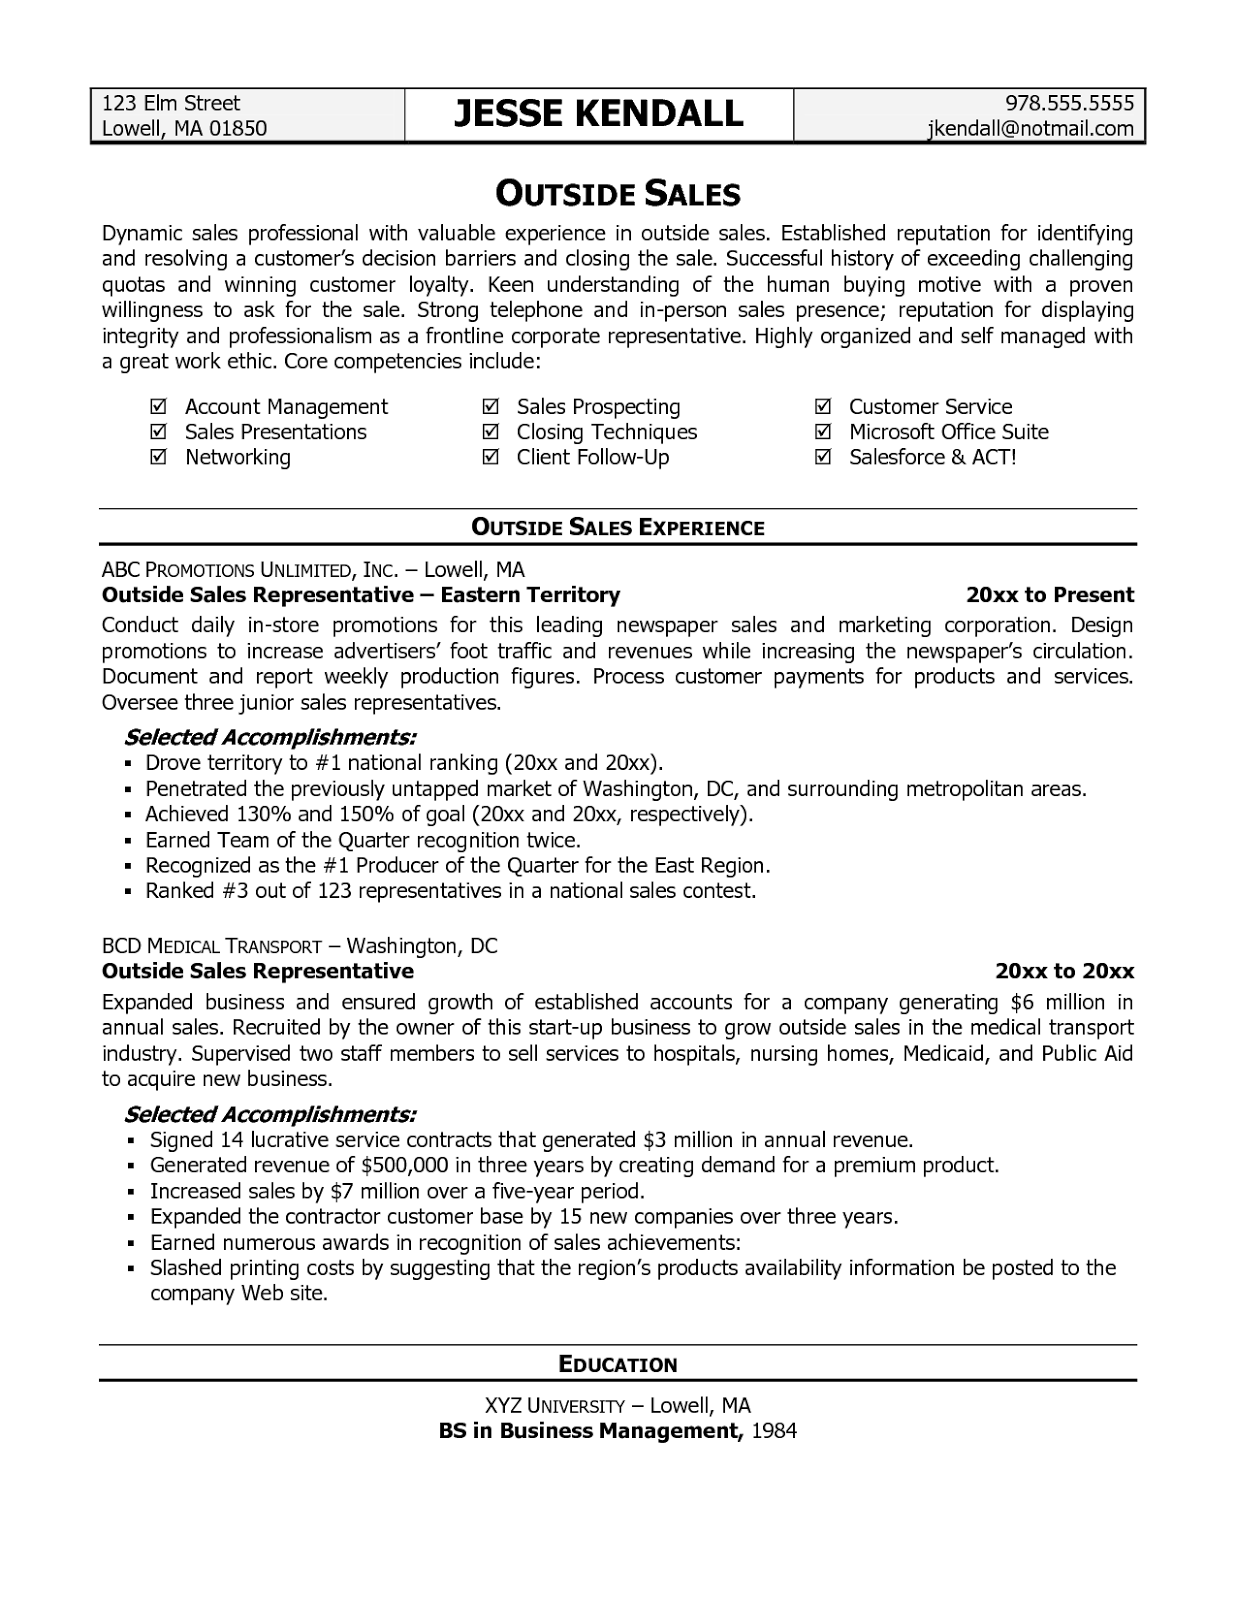 Resumes samples for sales jobs